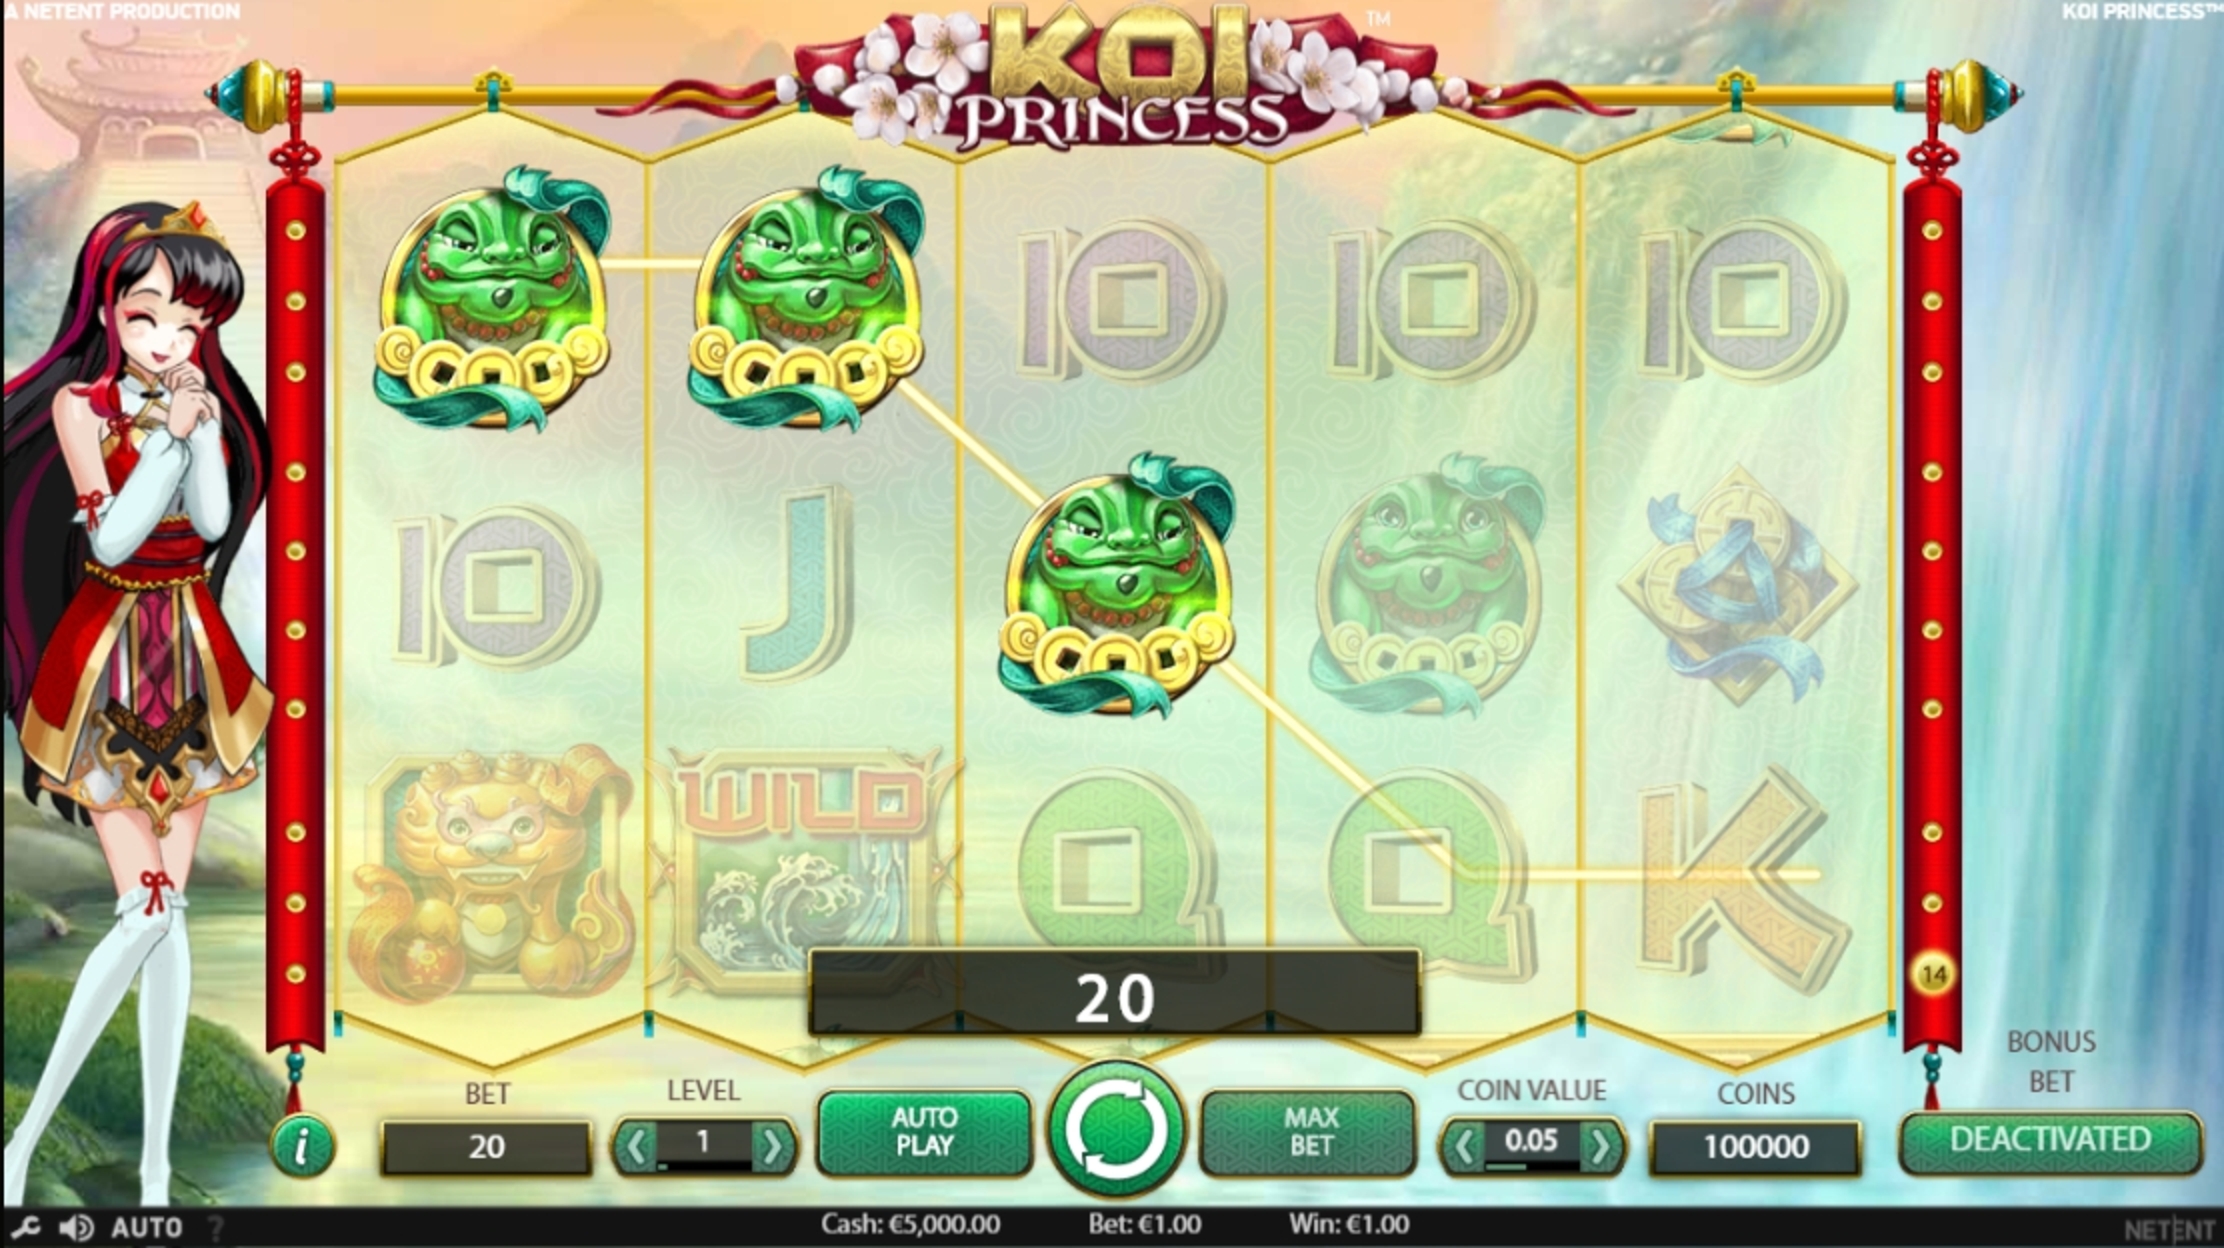 Win Money in Koi Princess Free Slot Game by NetEnt